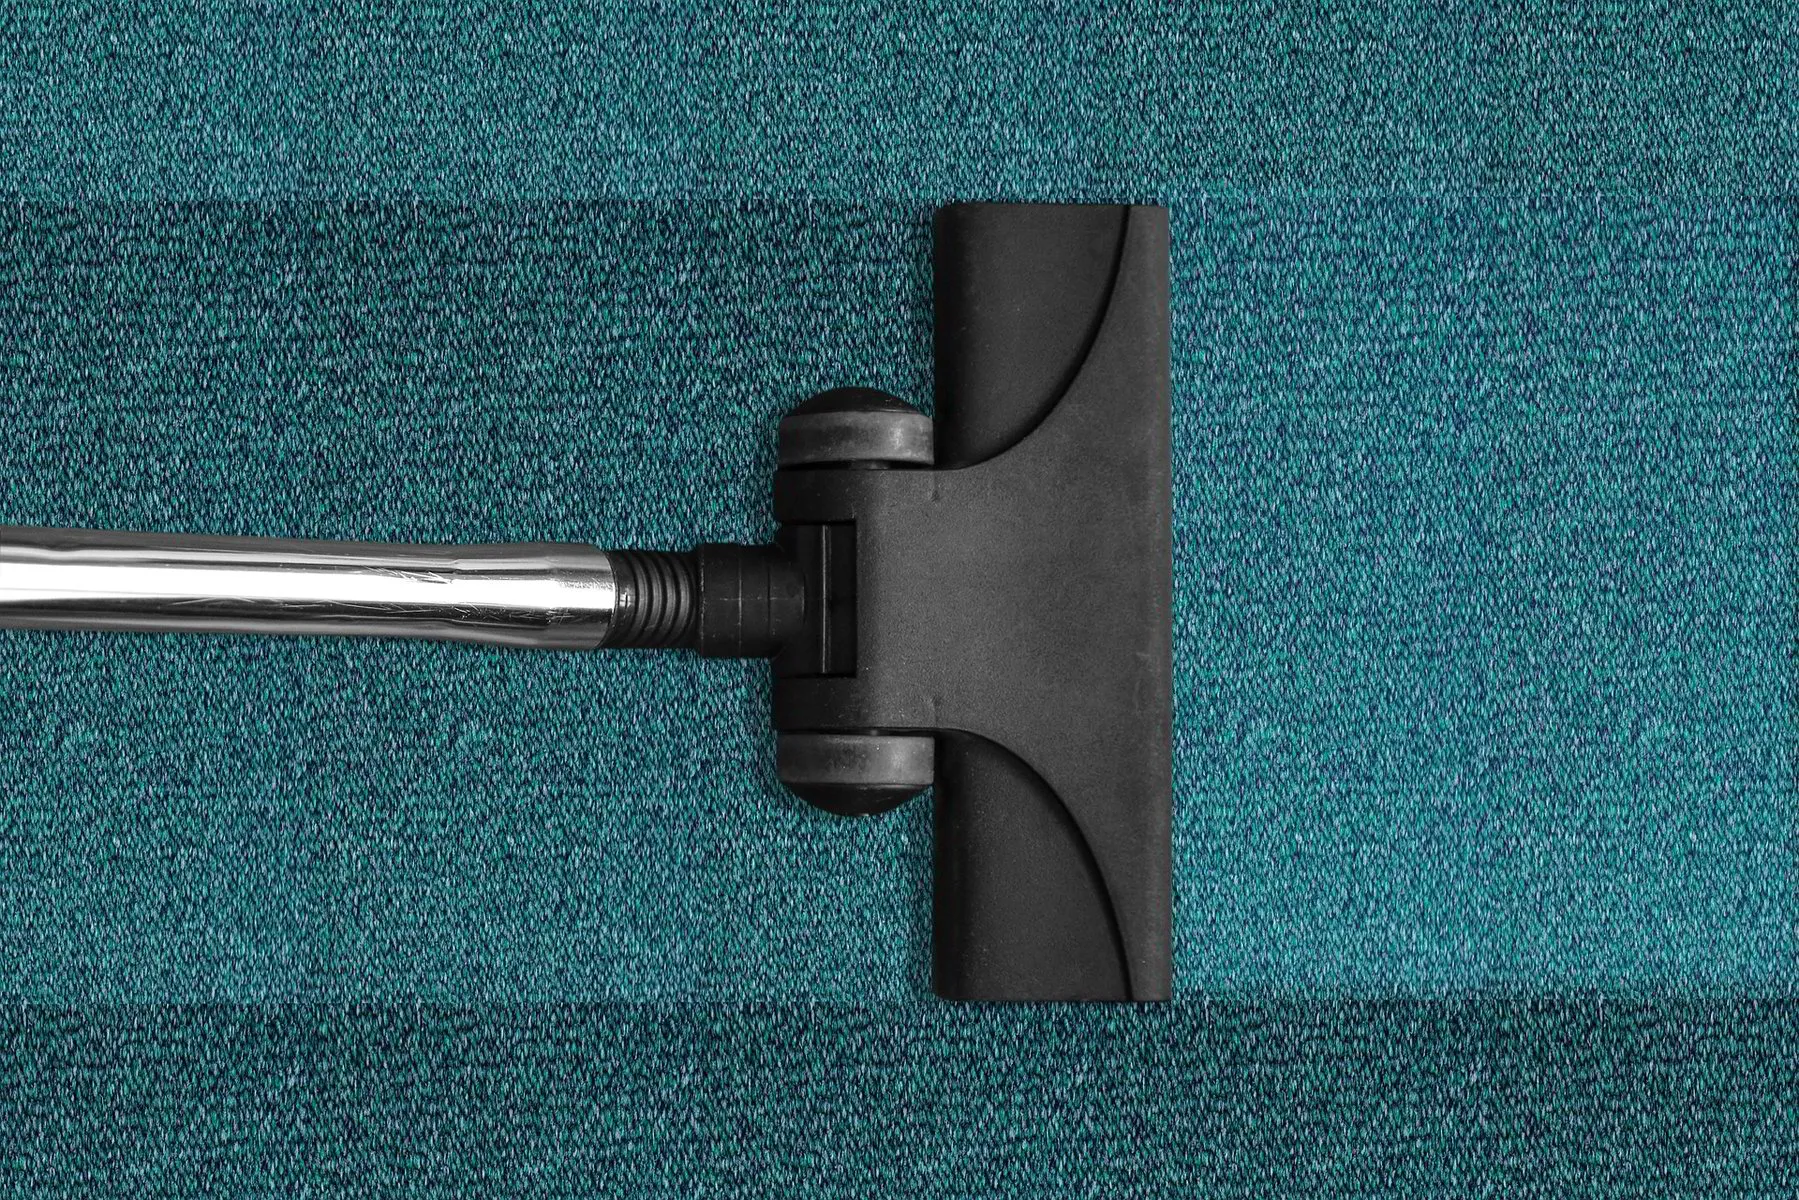 Basic Steps To Clean Your Floors